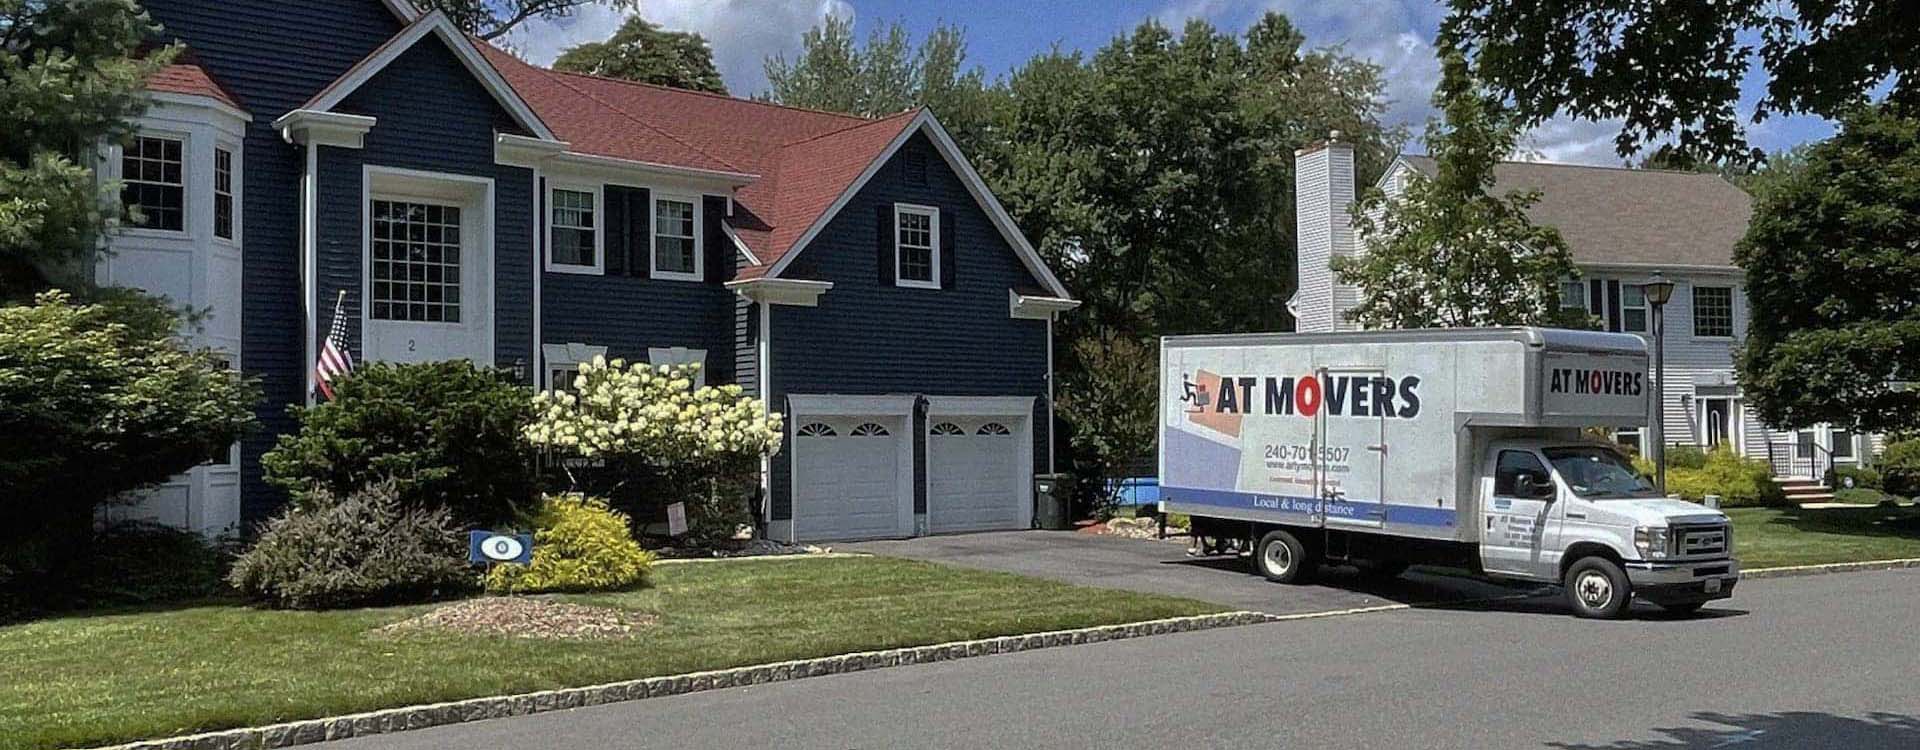 AT Movers Moving Truck Near House